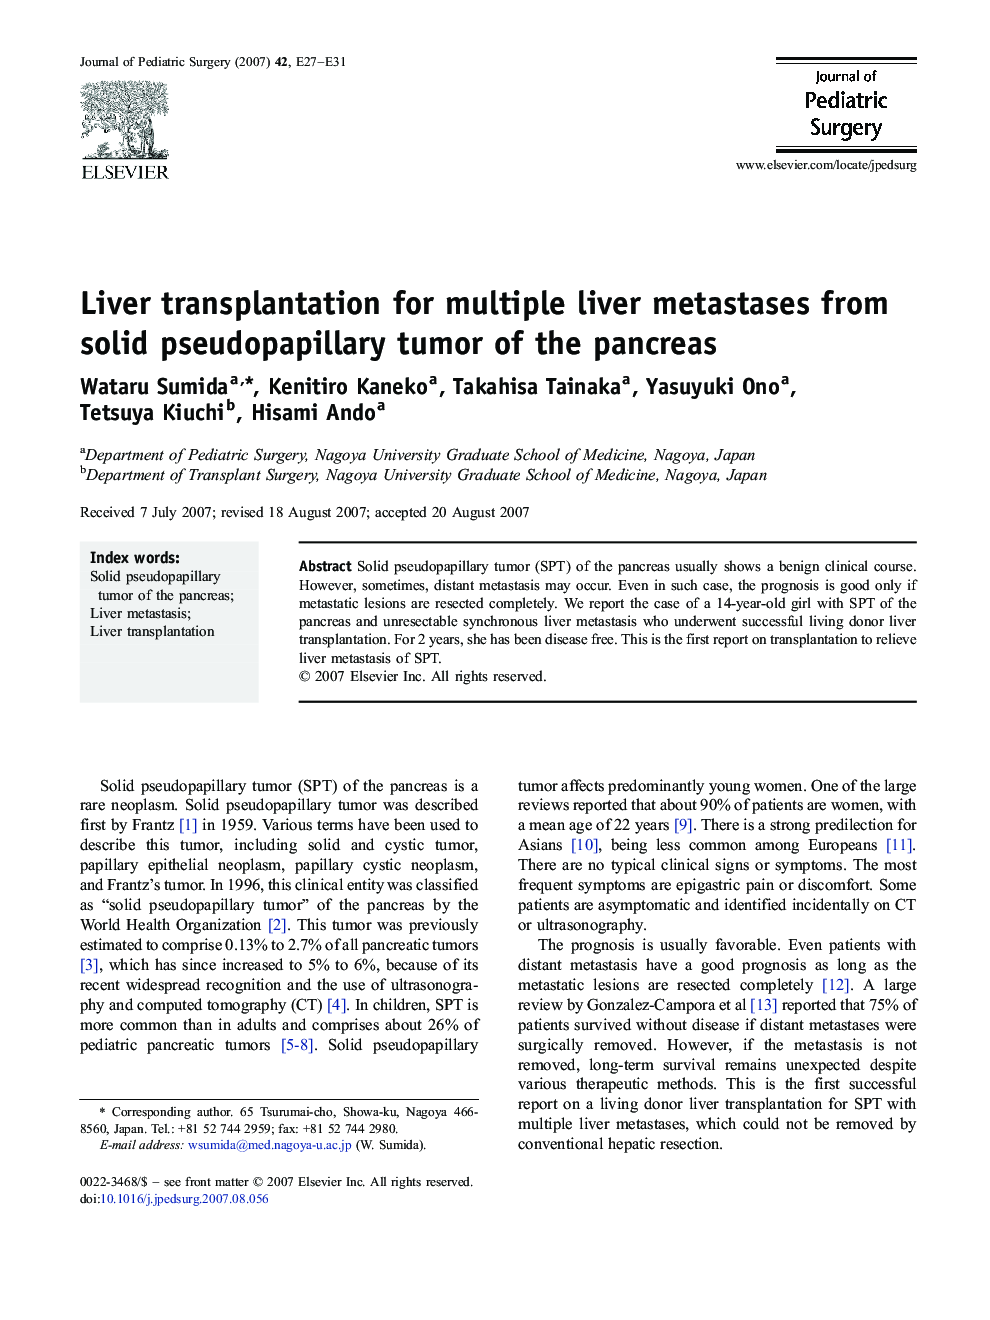 Liver transplantation for multiple liver metastases from solid pseudopapillary tumor of the pancreas